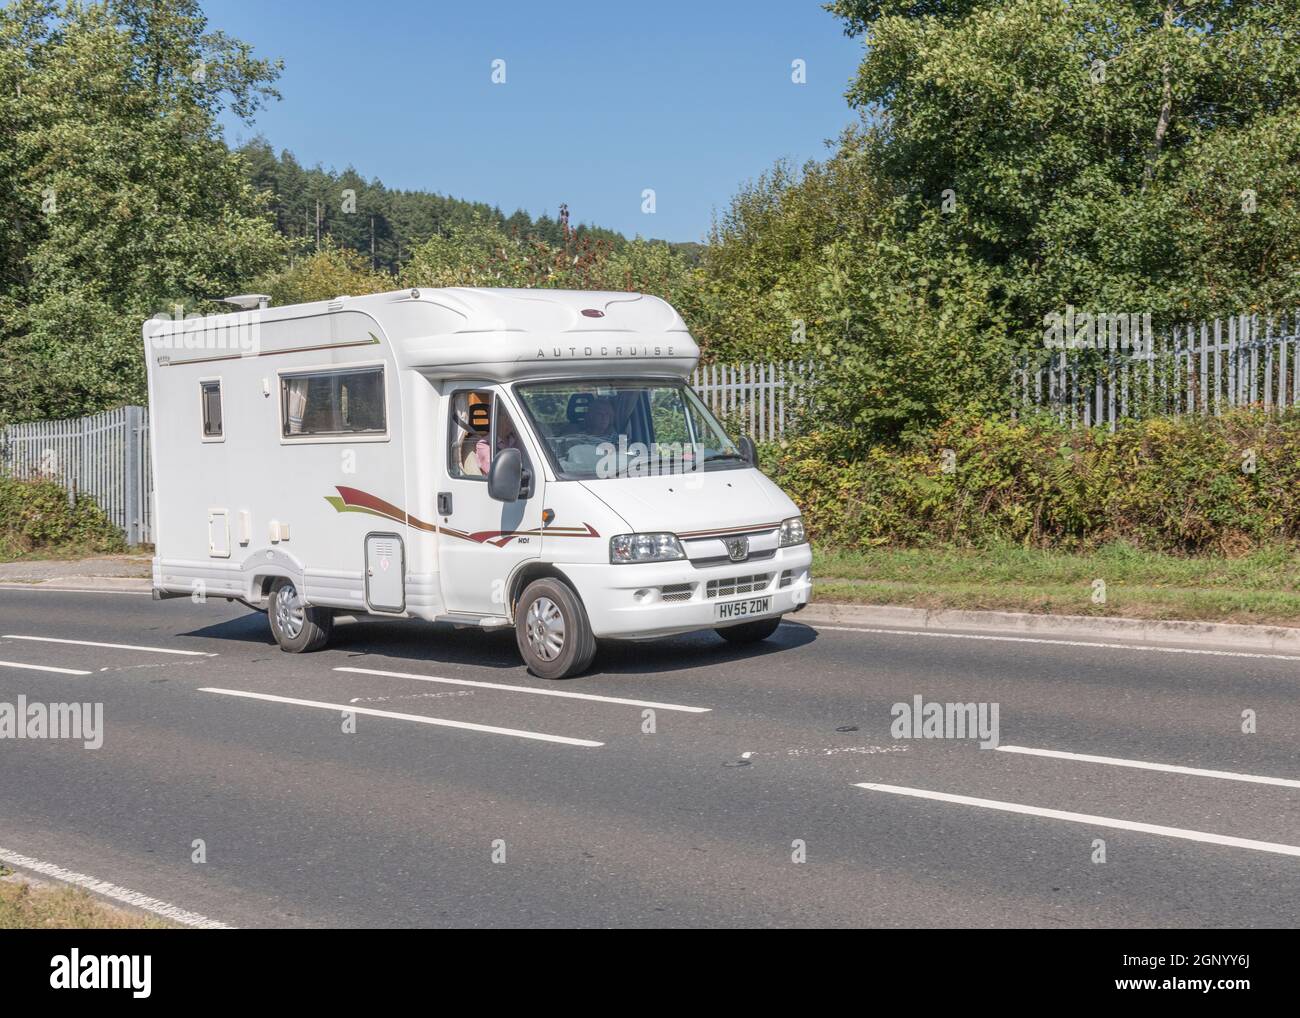 Motorhome travelling uphill on country road in Cornwall. For UK motorhomes, campervans, staycations in UK, alternative holidays. Stock Photo